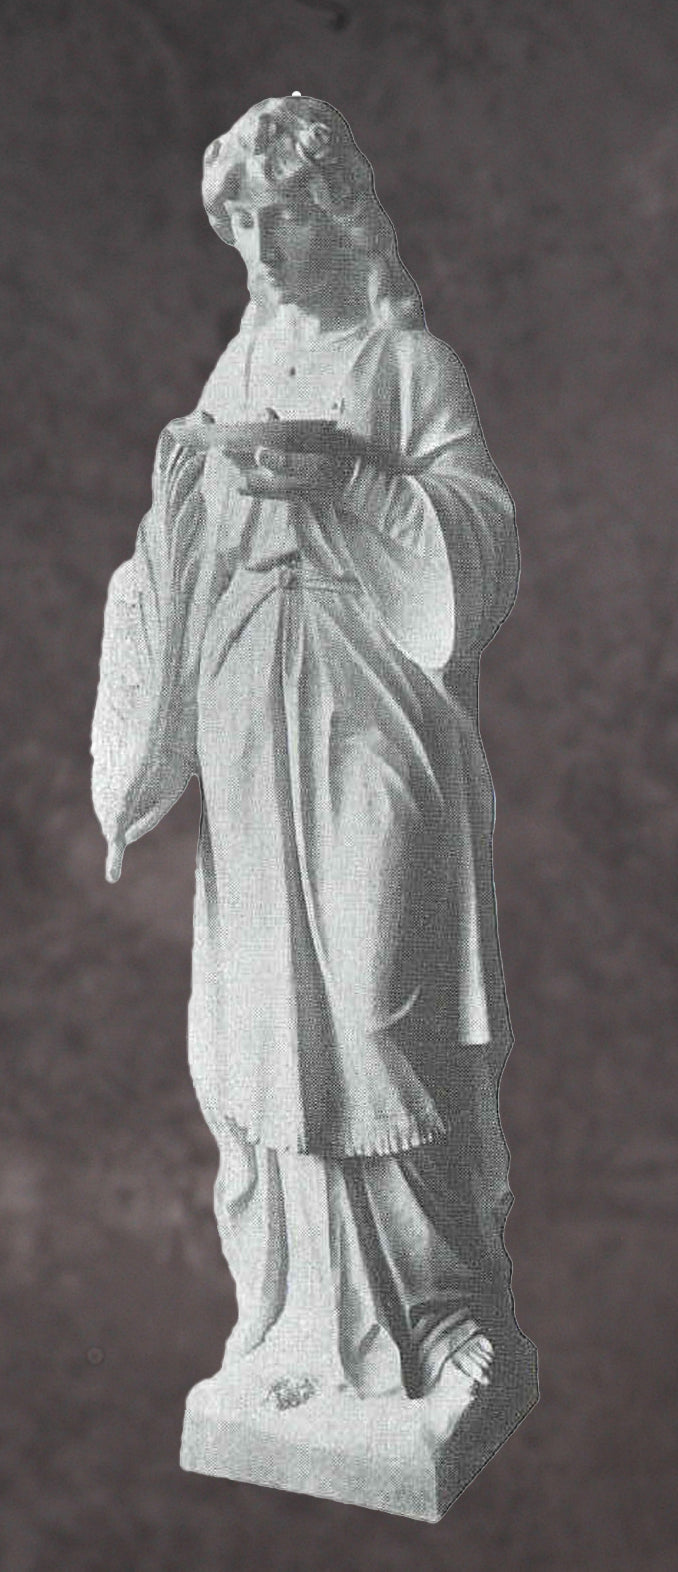 Saint Lucy Marble Statue - 60”H